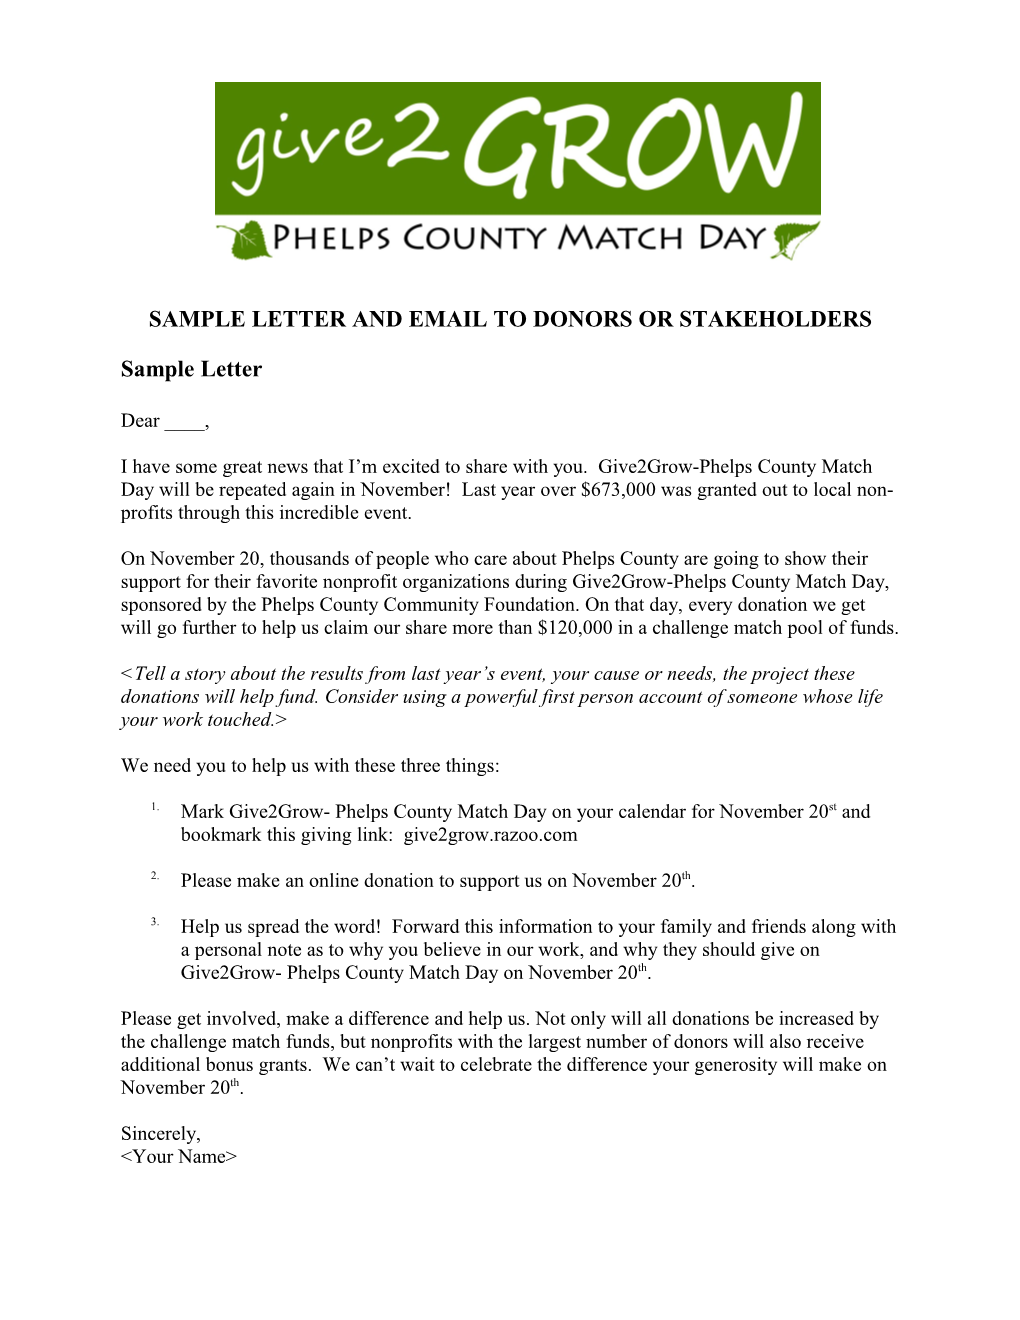 Sample Letter and Email to Donors Or Stakeholders